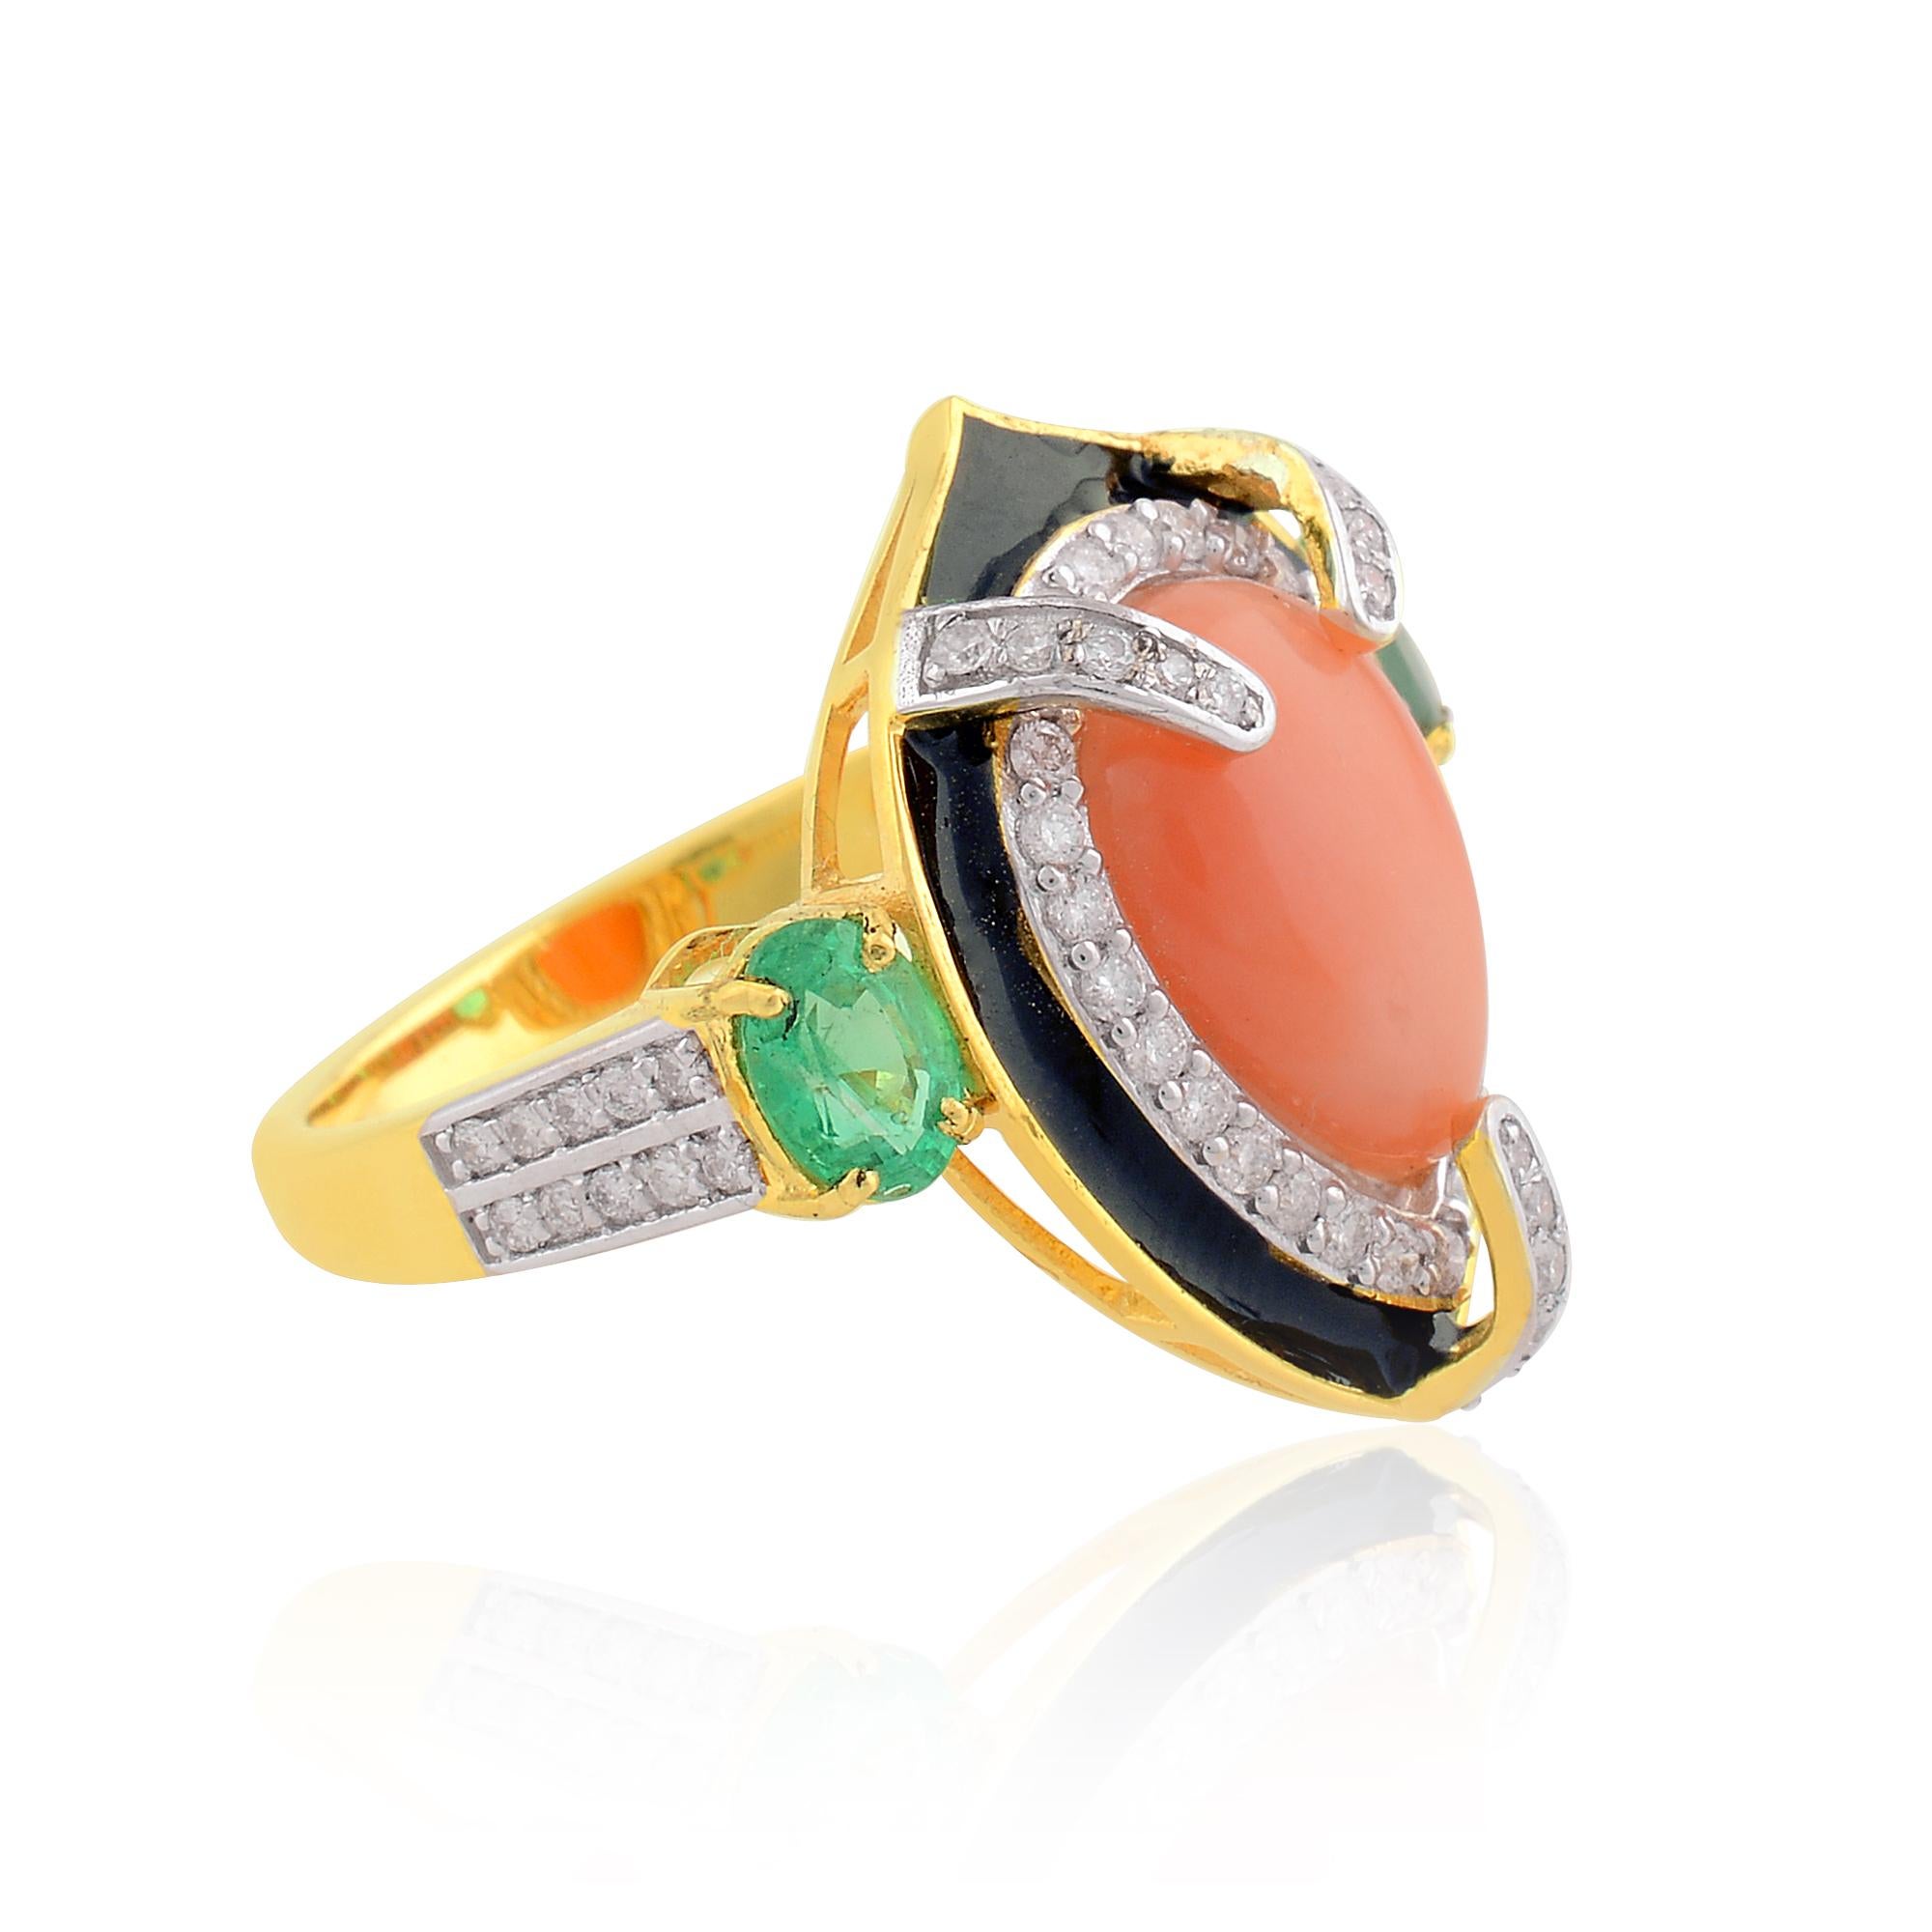 Item Code :- SER-2247A
Gross Wt :- 5.67 gm
Solid 14k Yellow Gold Wt :- 4.91 gm
Natural Diamond Wt :- 0.60 ct  ( AVERAGE DIAMOND CLARITY SI1-SI2 & COLOR H-I )
Emerald & Coral Wt :- 4.31 ct
Ring Size :- 7 US & All size available

✦